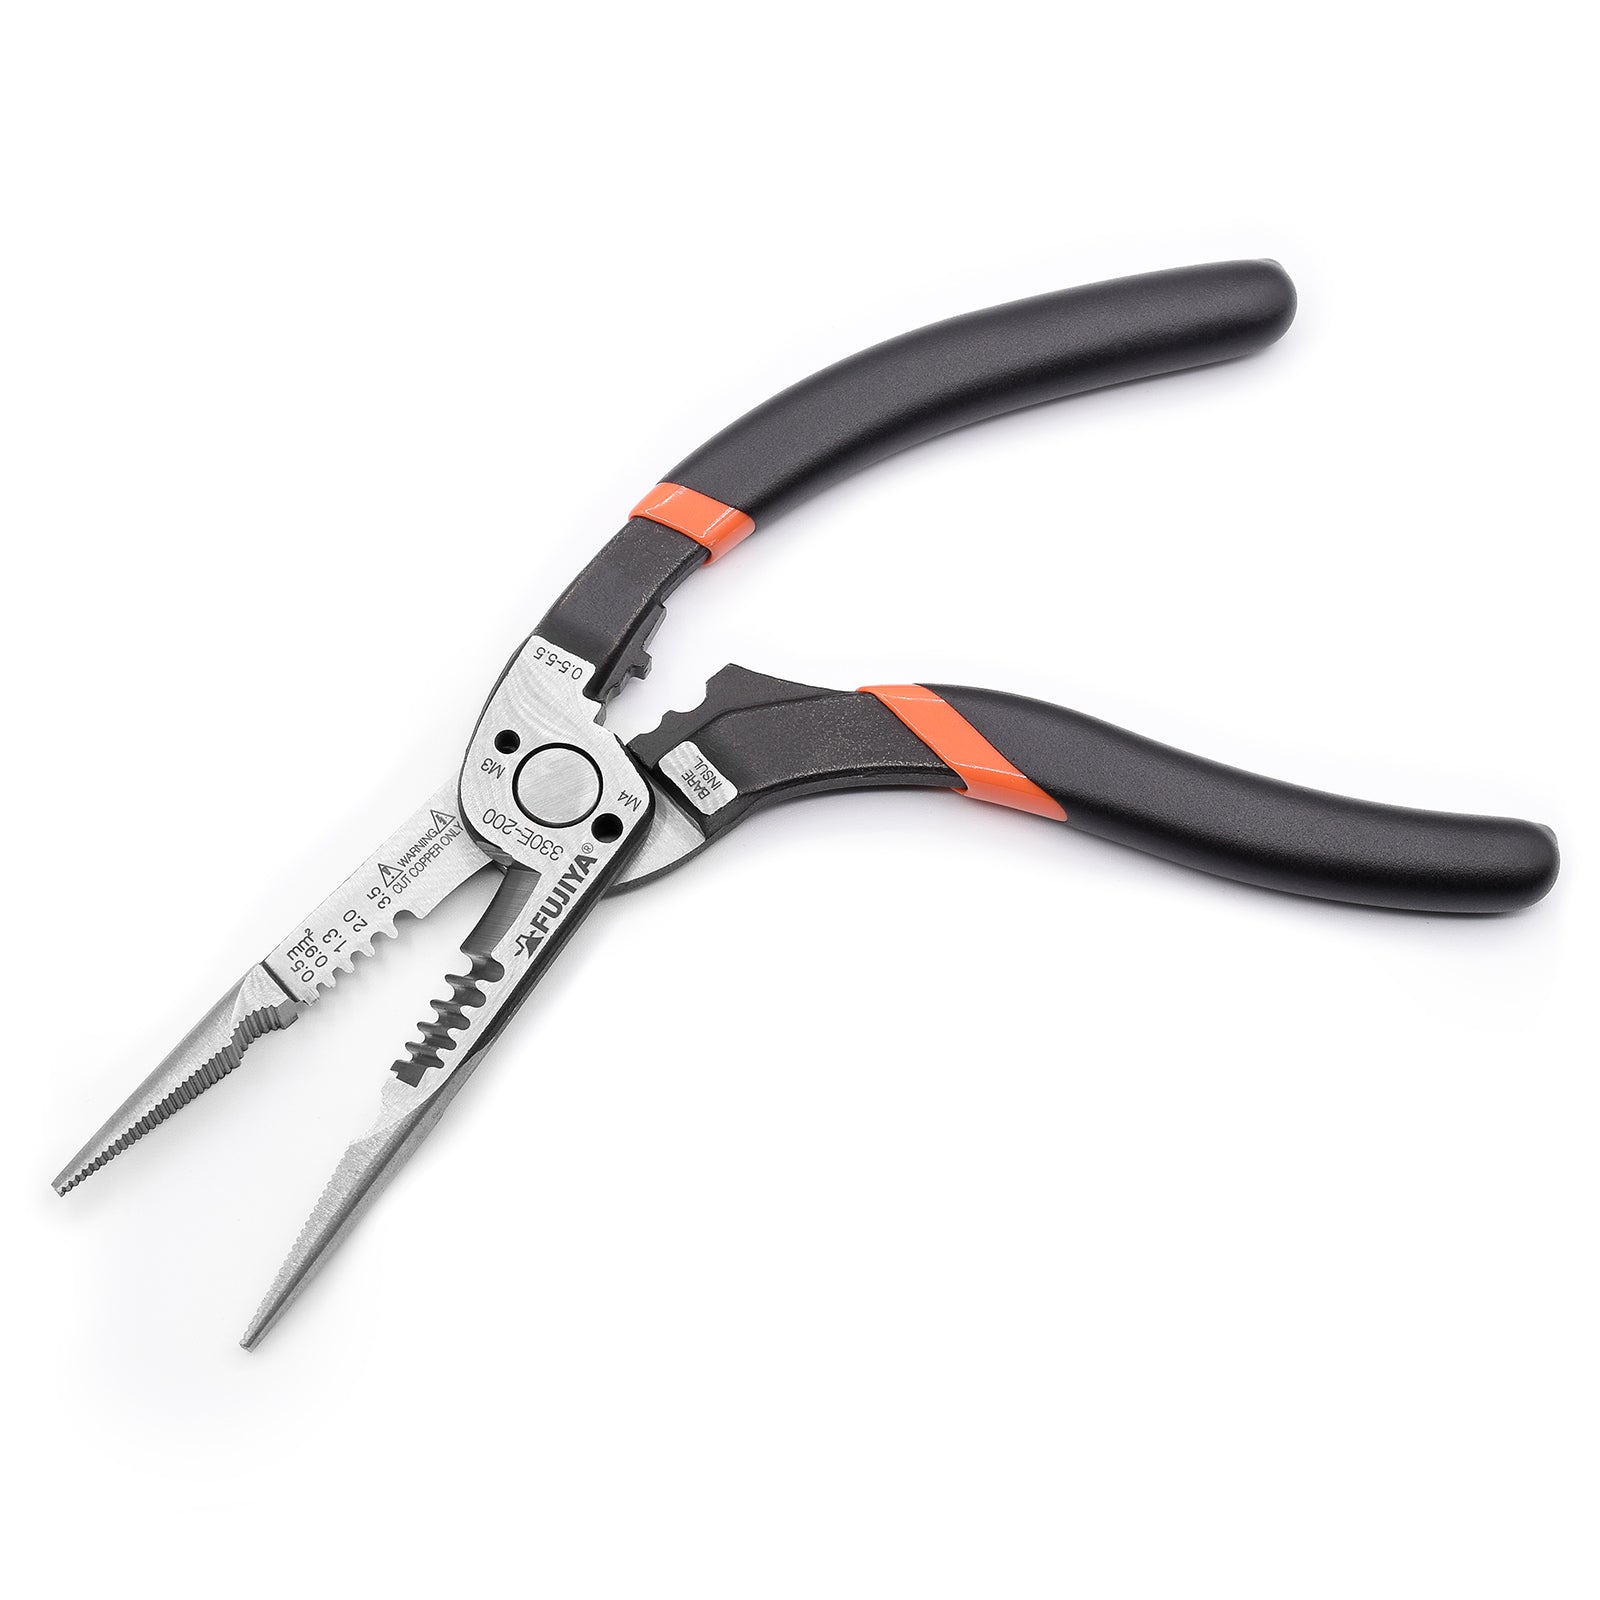 Fujiya Electrician's Plier with Ergonomic Curved Handles - Micro - Mark Nippers